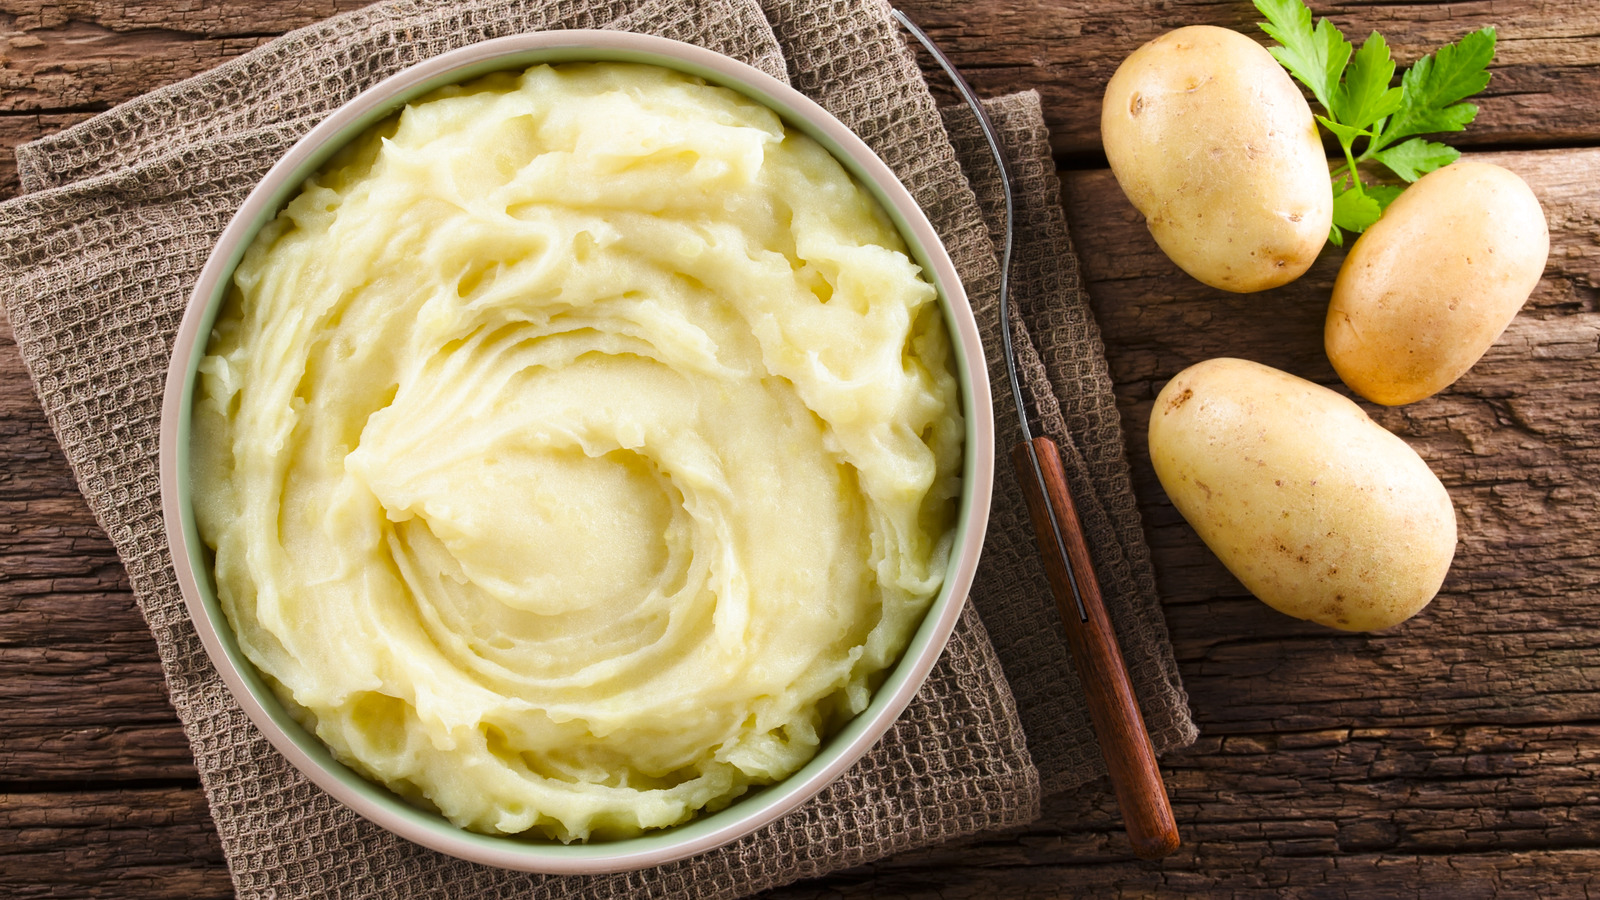 Instantly Upgrade Mashed Potatoes With This Creamy Cheese